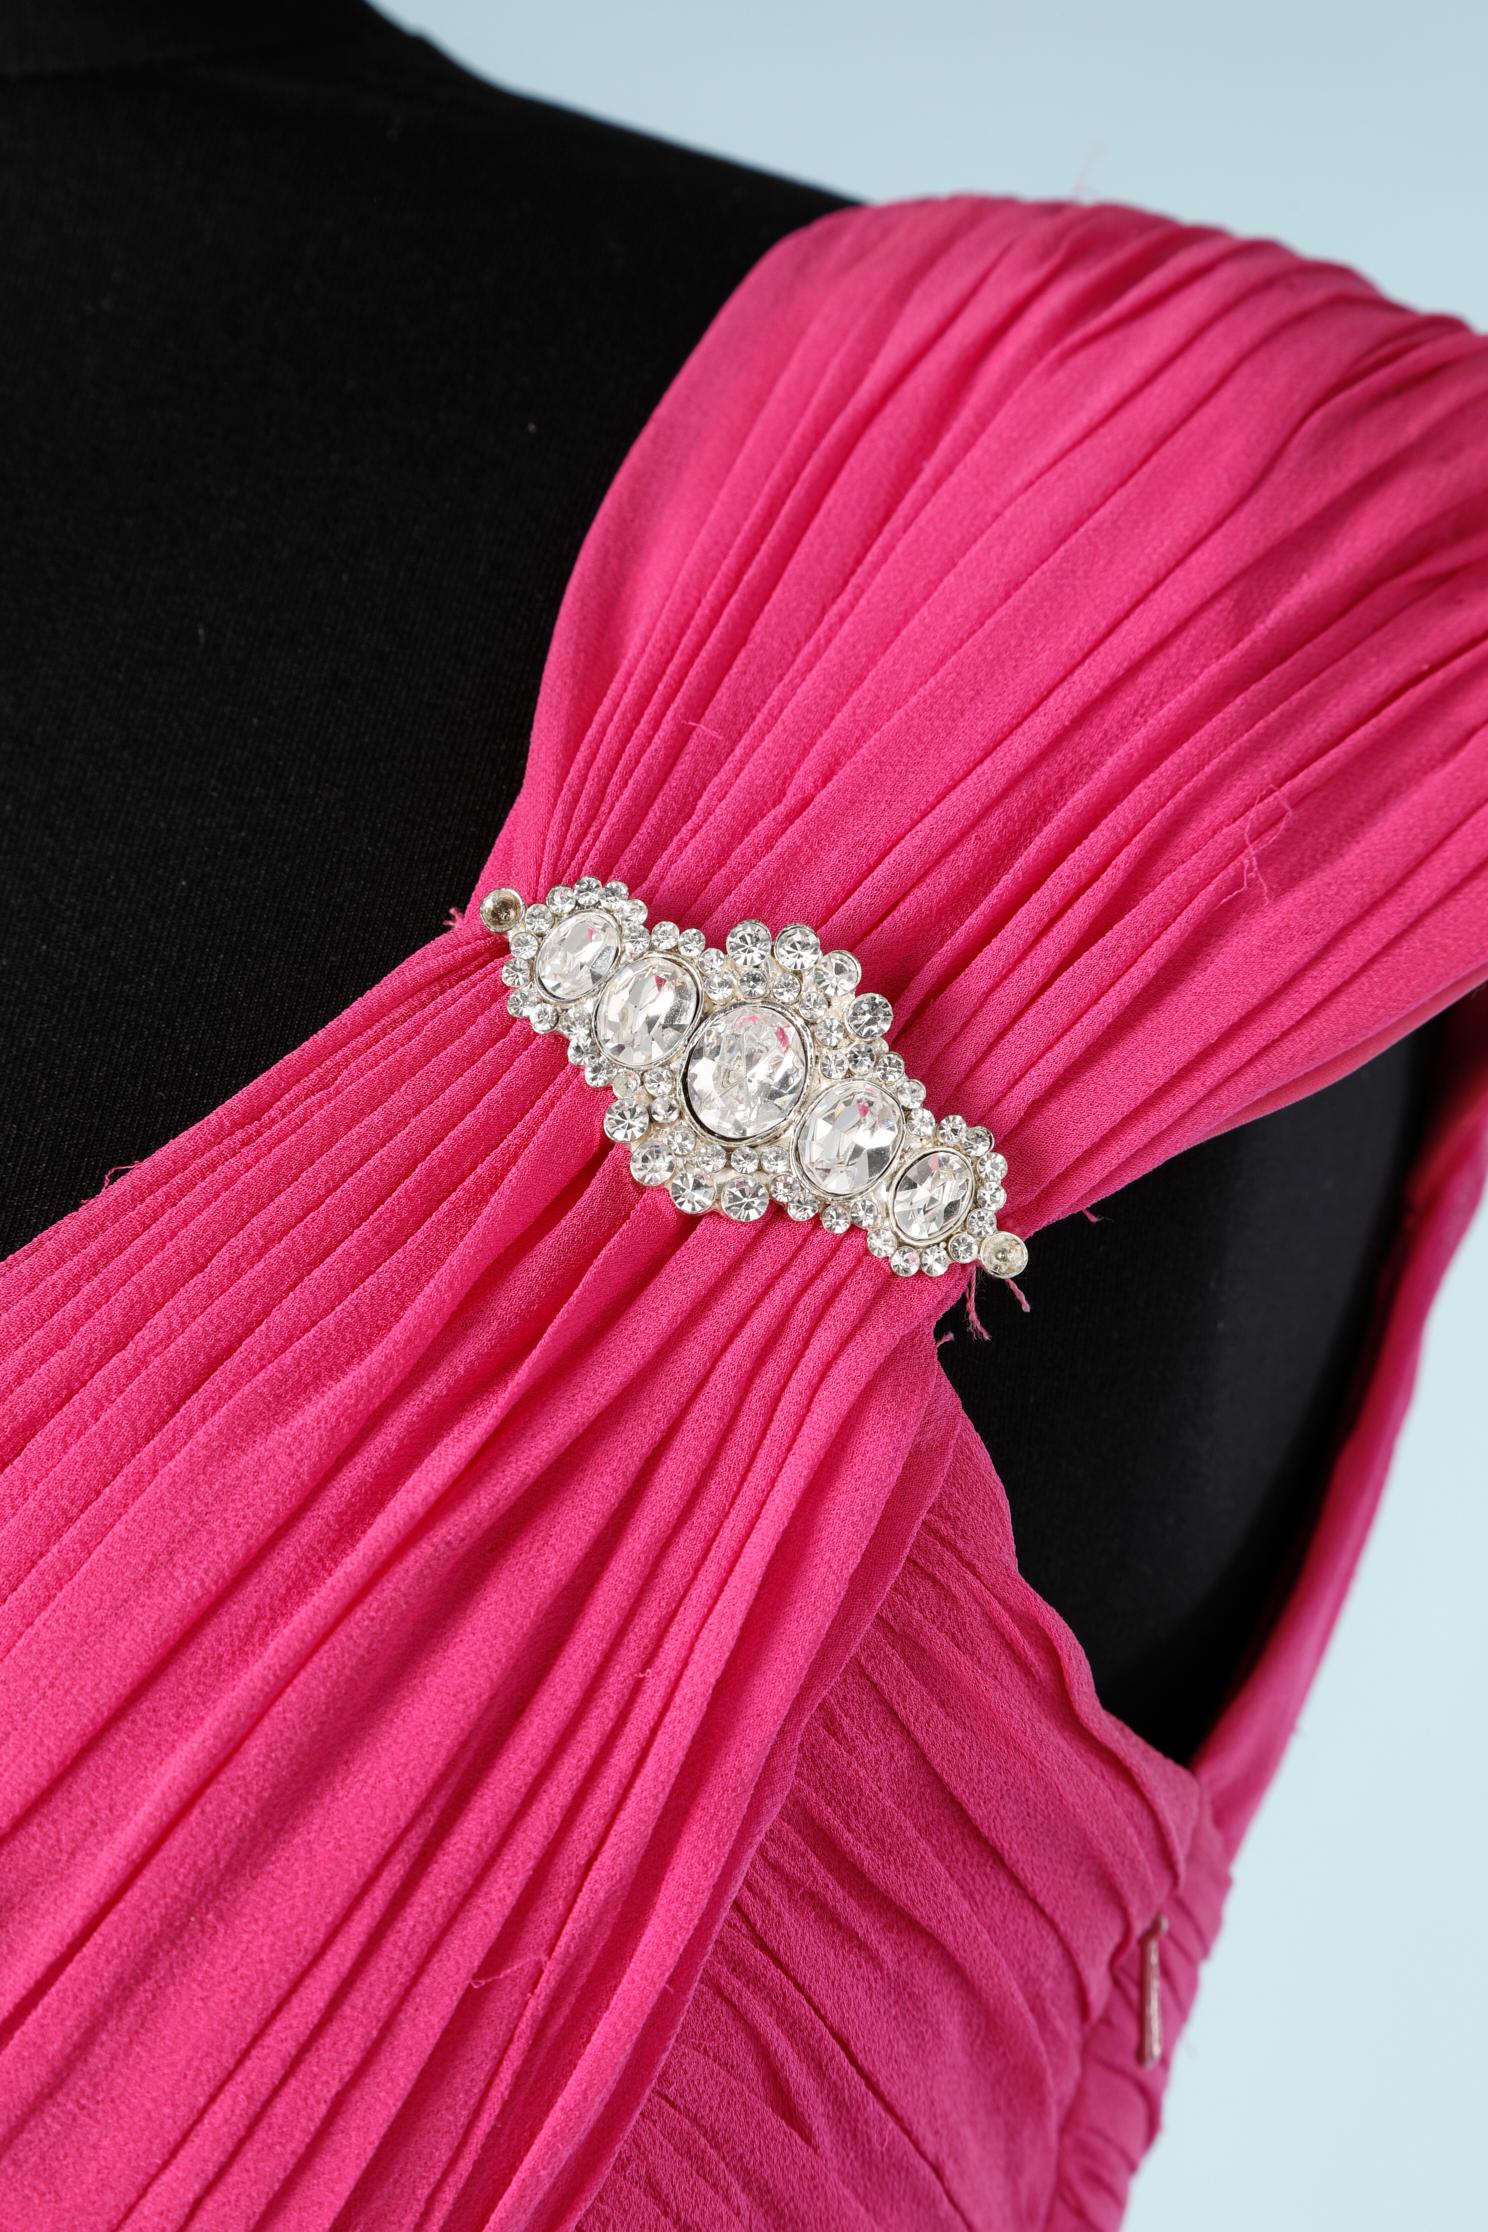  60's chiffon cocktail dress totally draped with a rhinestone broche 